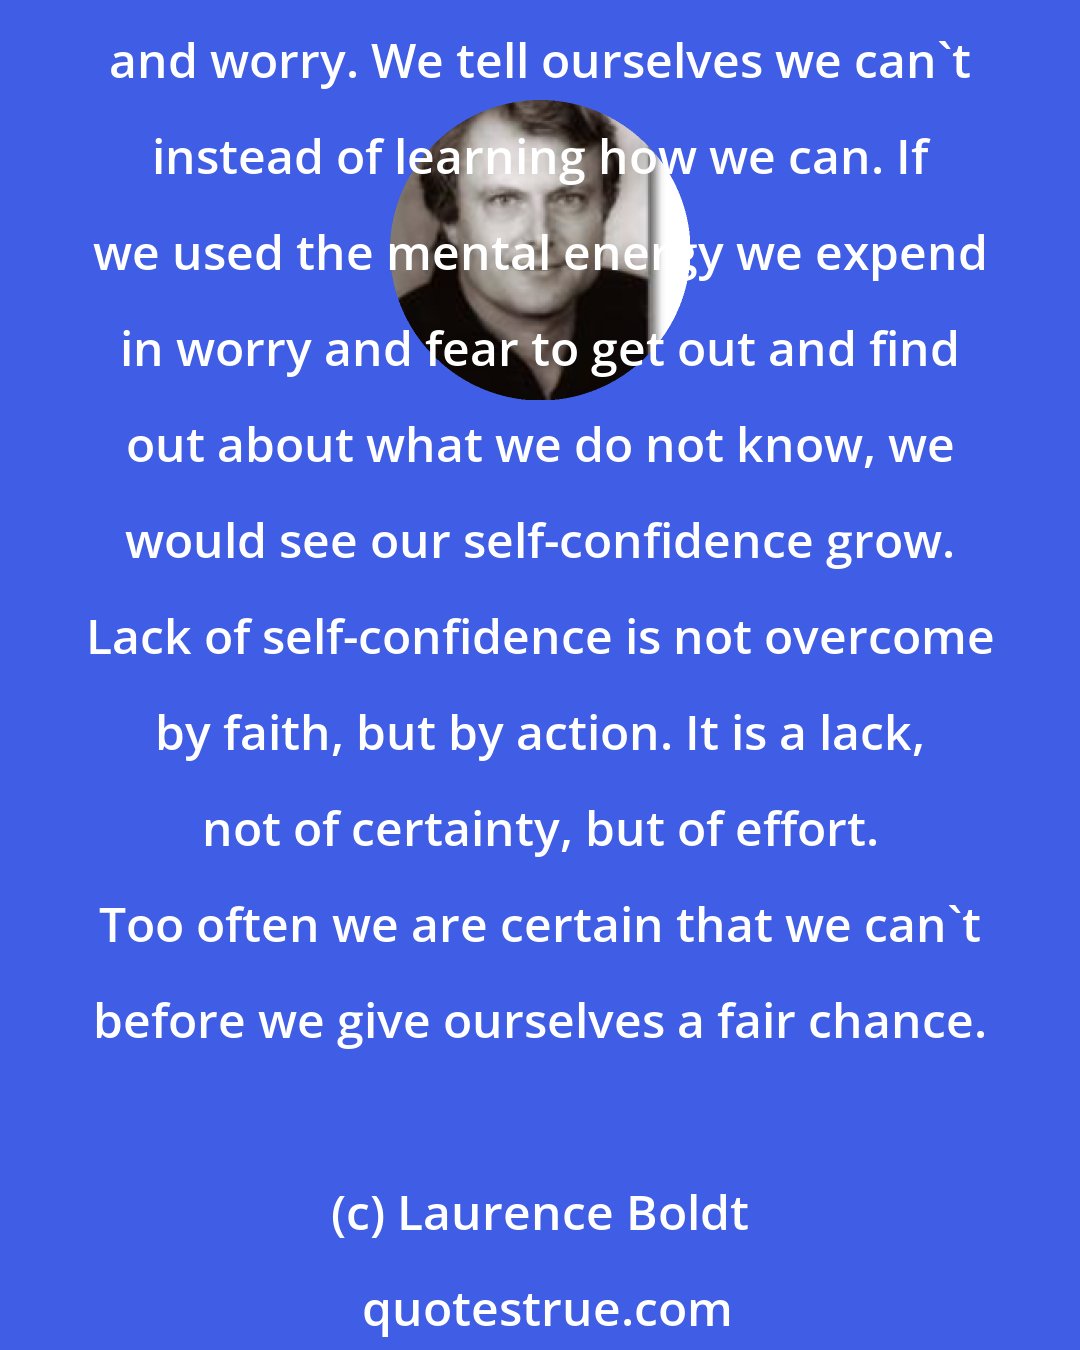 Laurence Boldt: Lack of self-confidence is, more often than not, simple laziness. We feel confused and uncertain because we do not know. But instead of making the effort to investigate, we procrastinate and worry. We tell ourselves we can't instead of learning how we can. If we used the mental energy we expend in worry and fear to get out and find out about what we do not know, we would see our self-confidence grow. Lack of self-confidence is not overcome by faith, but by action. It is a lack, not of certainty, but of effort. Too often we are certain that we can't before we give ourselves a fair chance.